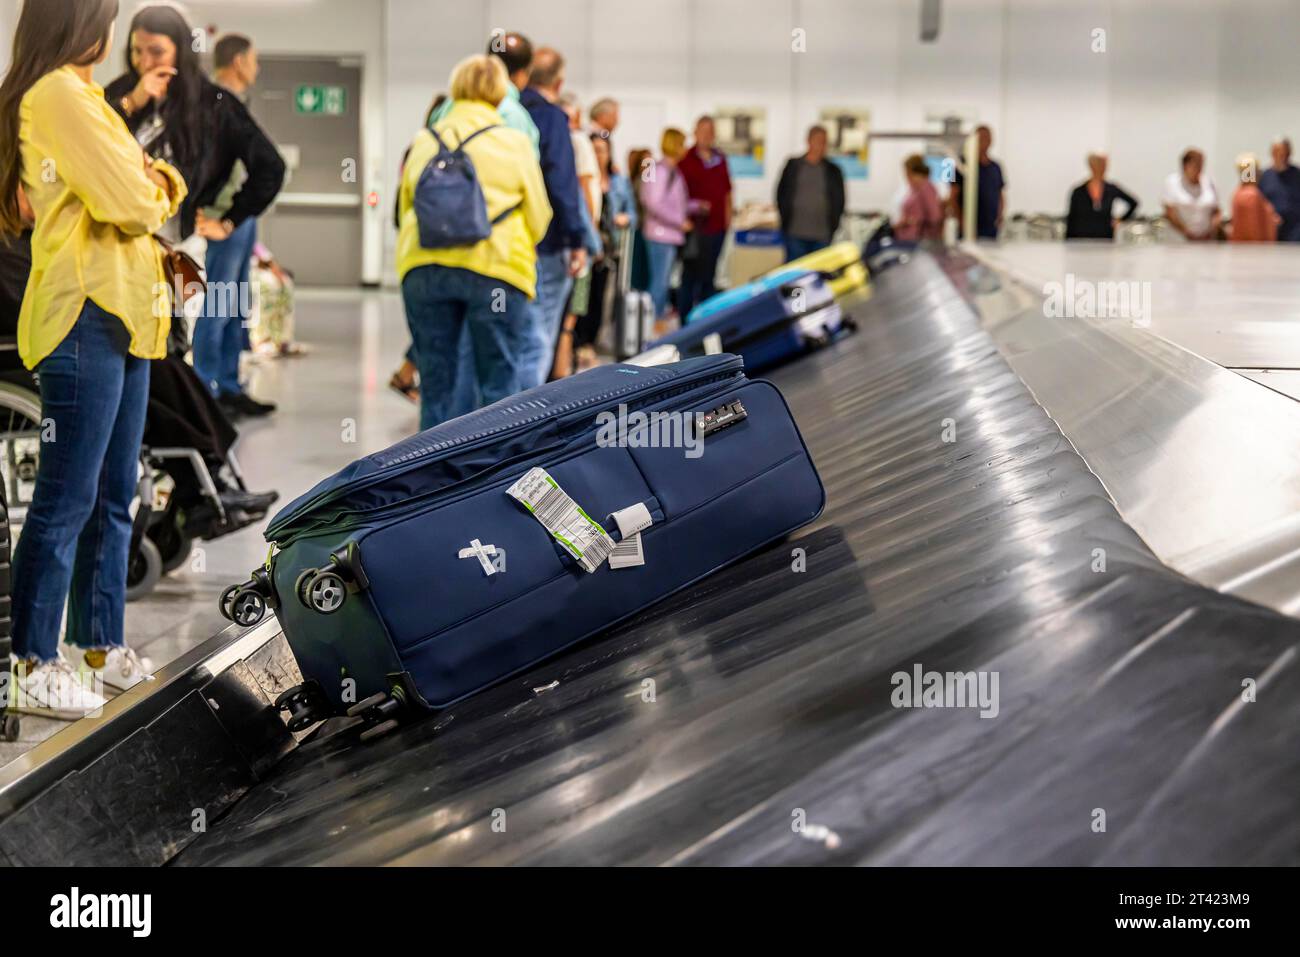 Baggage carousel at the airport, baggage claim, travellers waiting for their suitcase, Stuttgart, Baden-Wuerttemberg, Germany Stock Photo